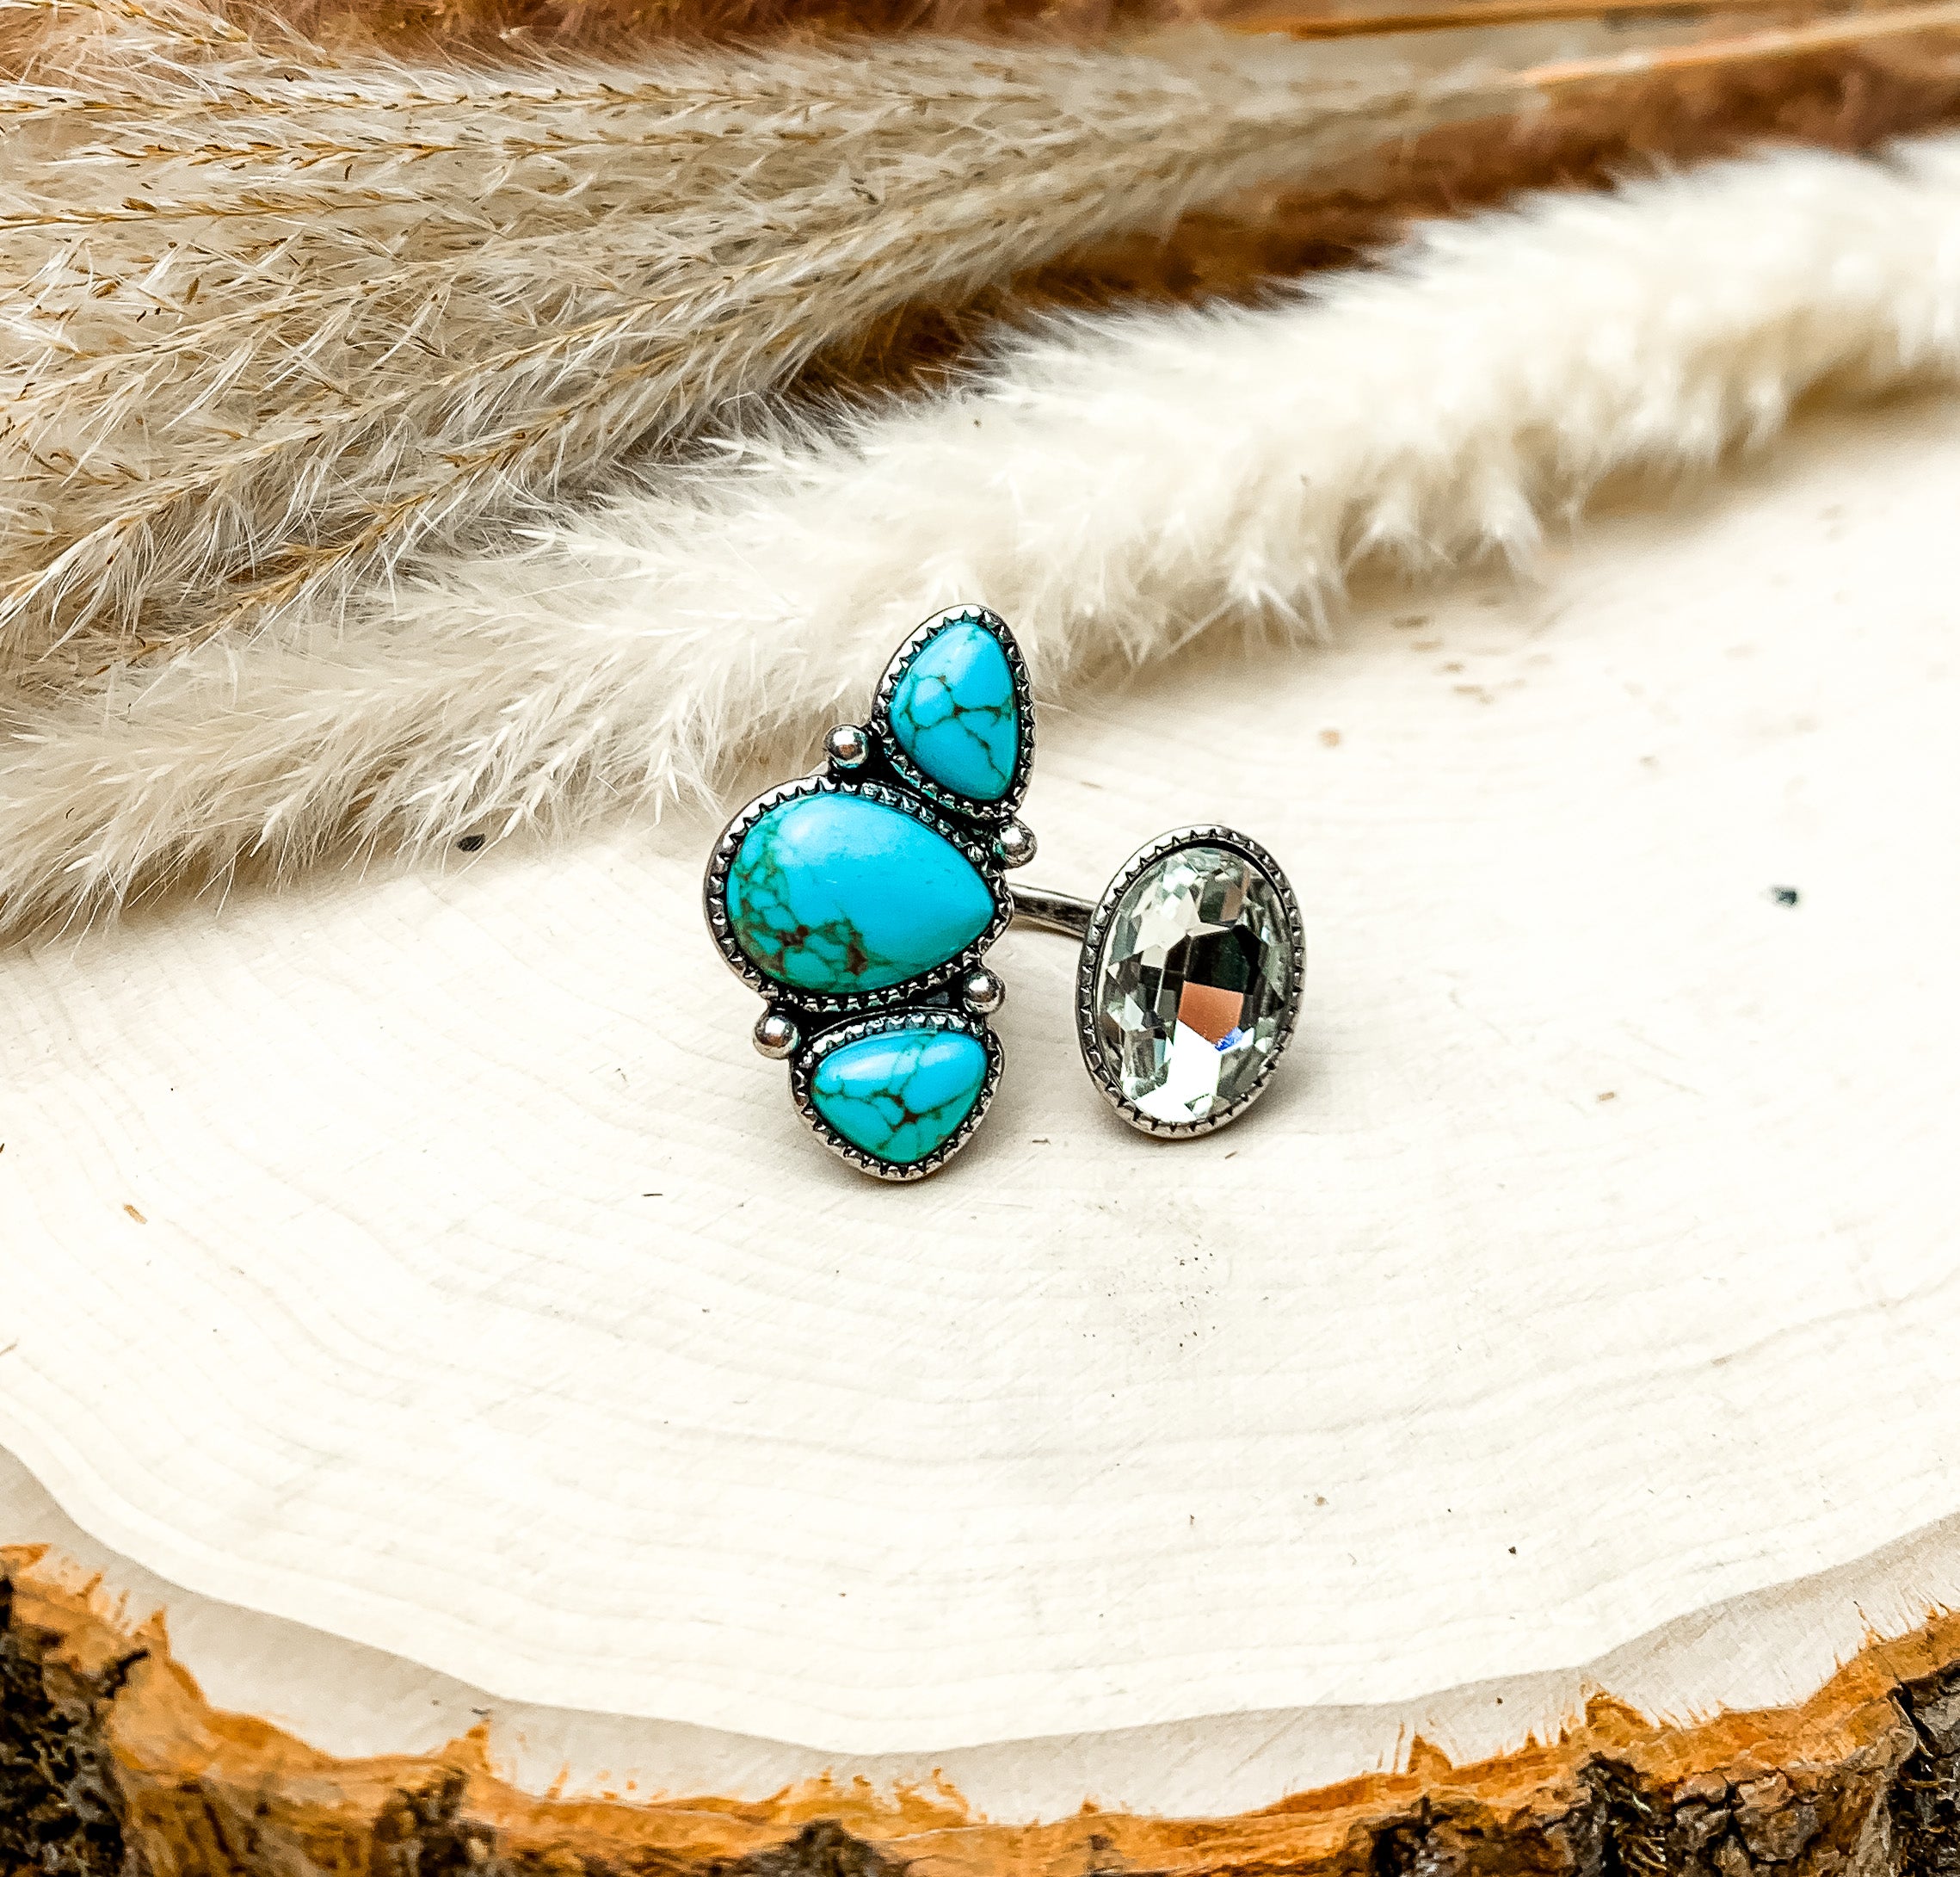 Duo Finger Ring With multiple Turquoise Blue Stones a and Clear Crystal. The ring is pictured on a wood piece with feathers behind it.